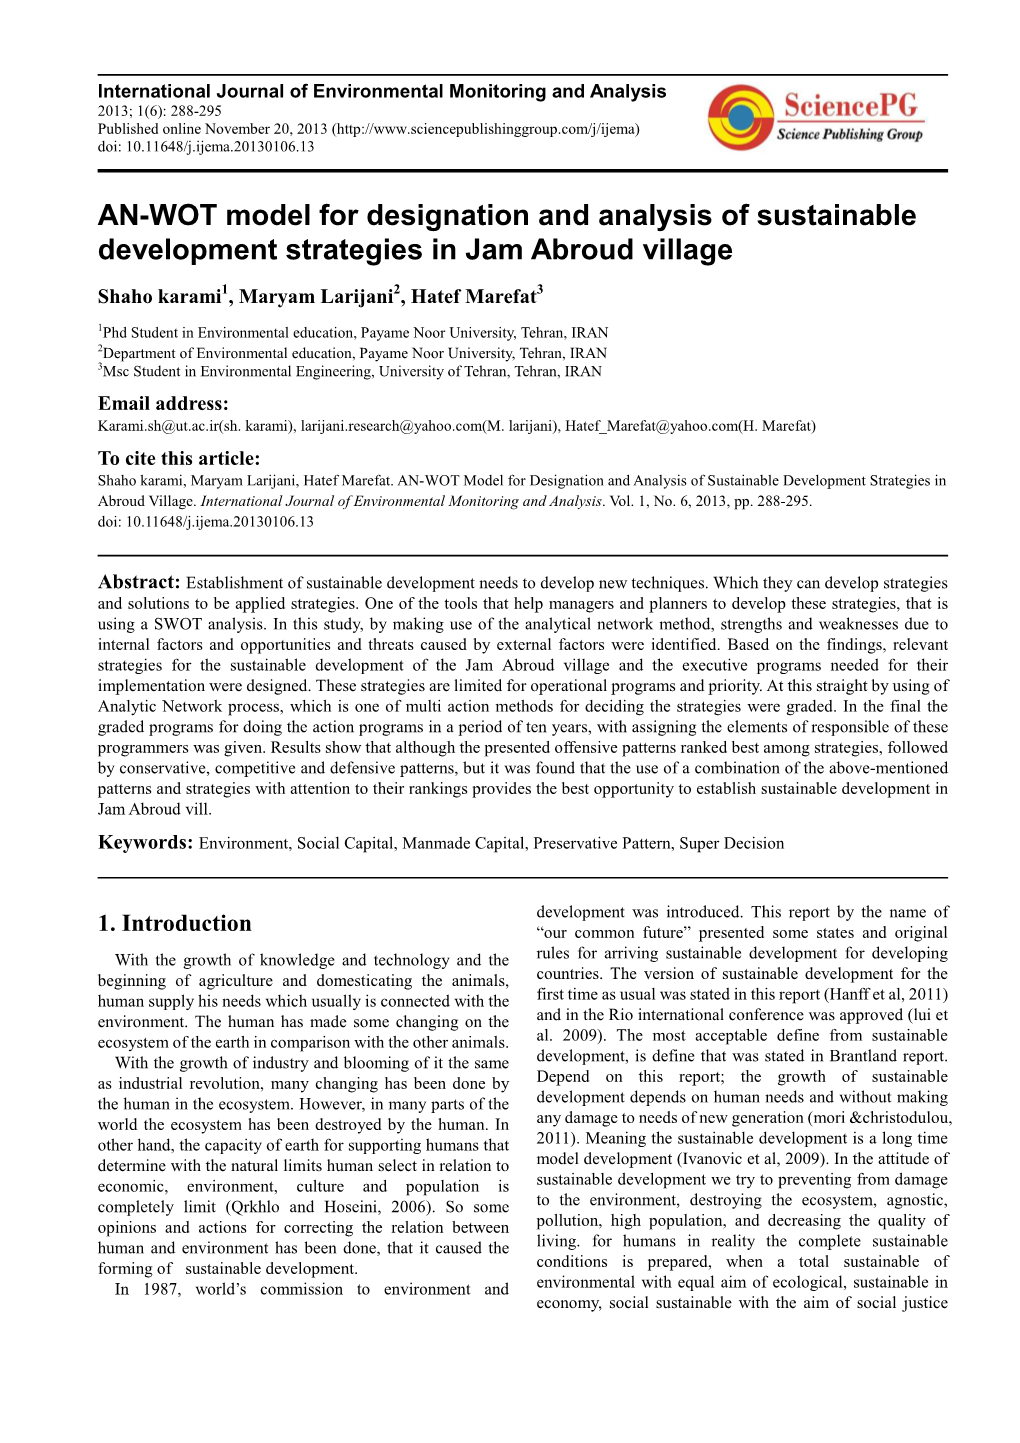 AN-WOT Model for Designation and Analysis of Sustainable Development Strategies in Jam Abroud Village